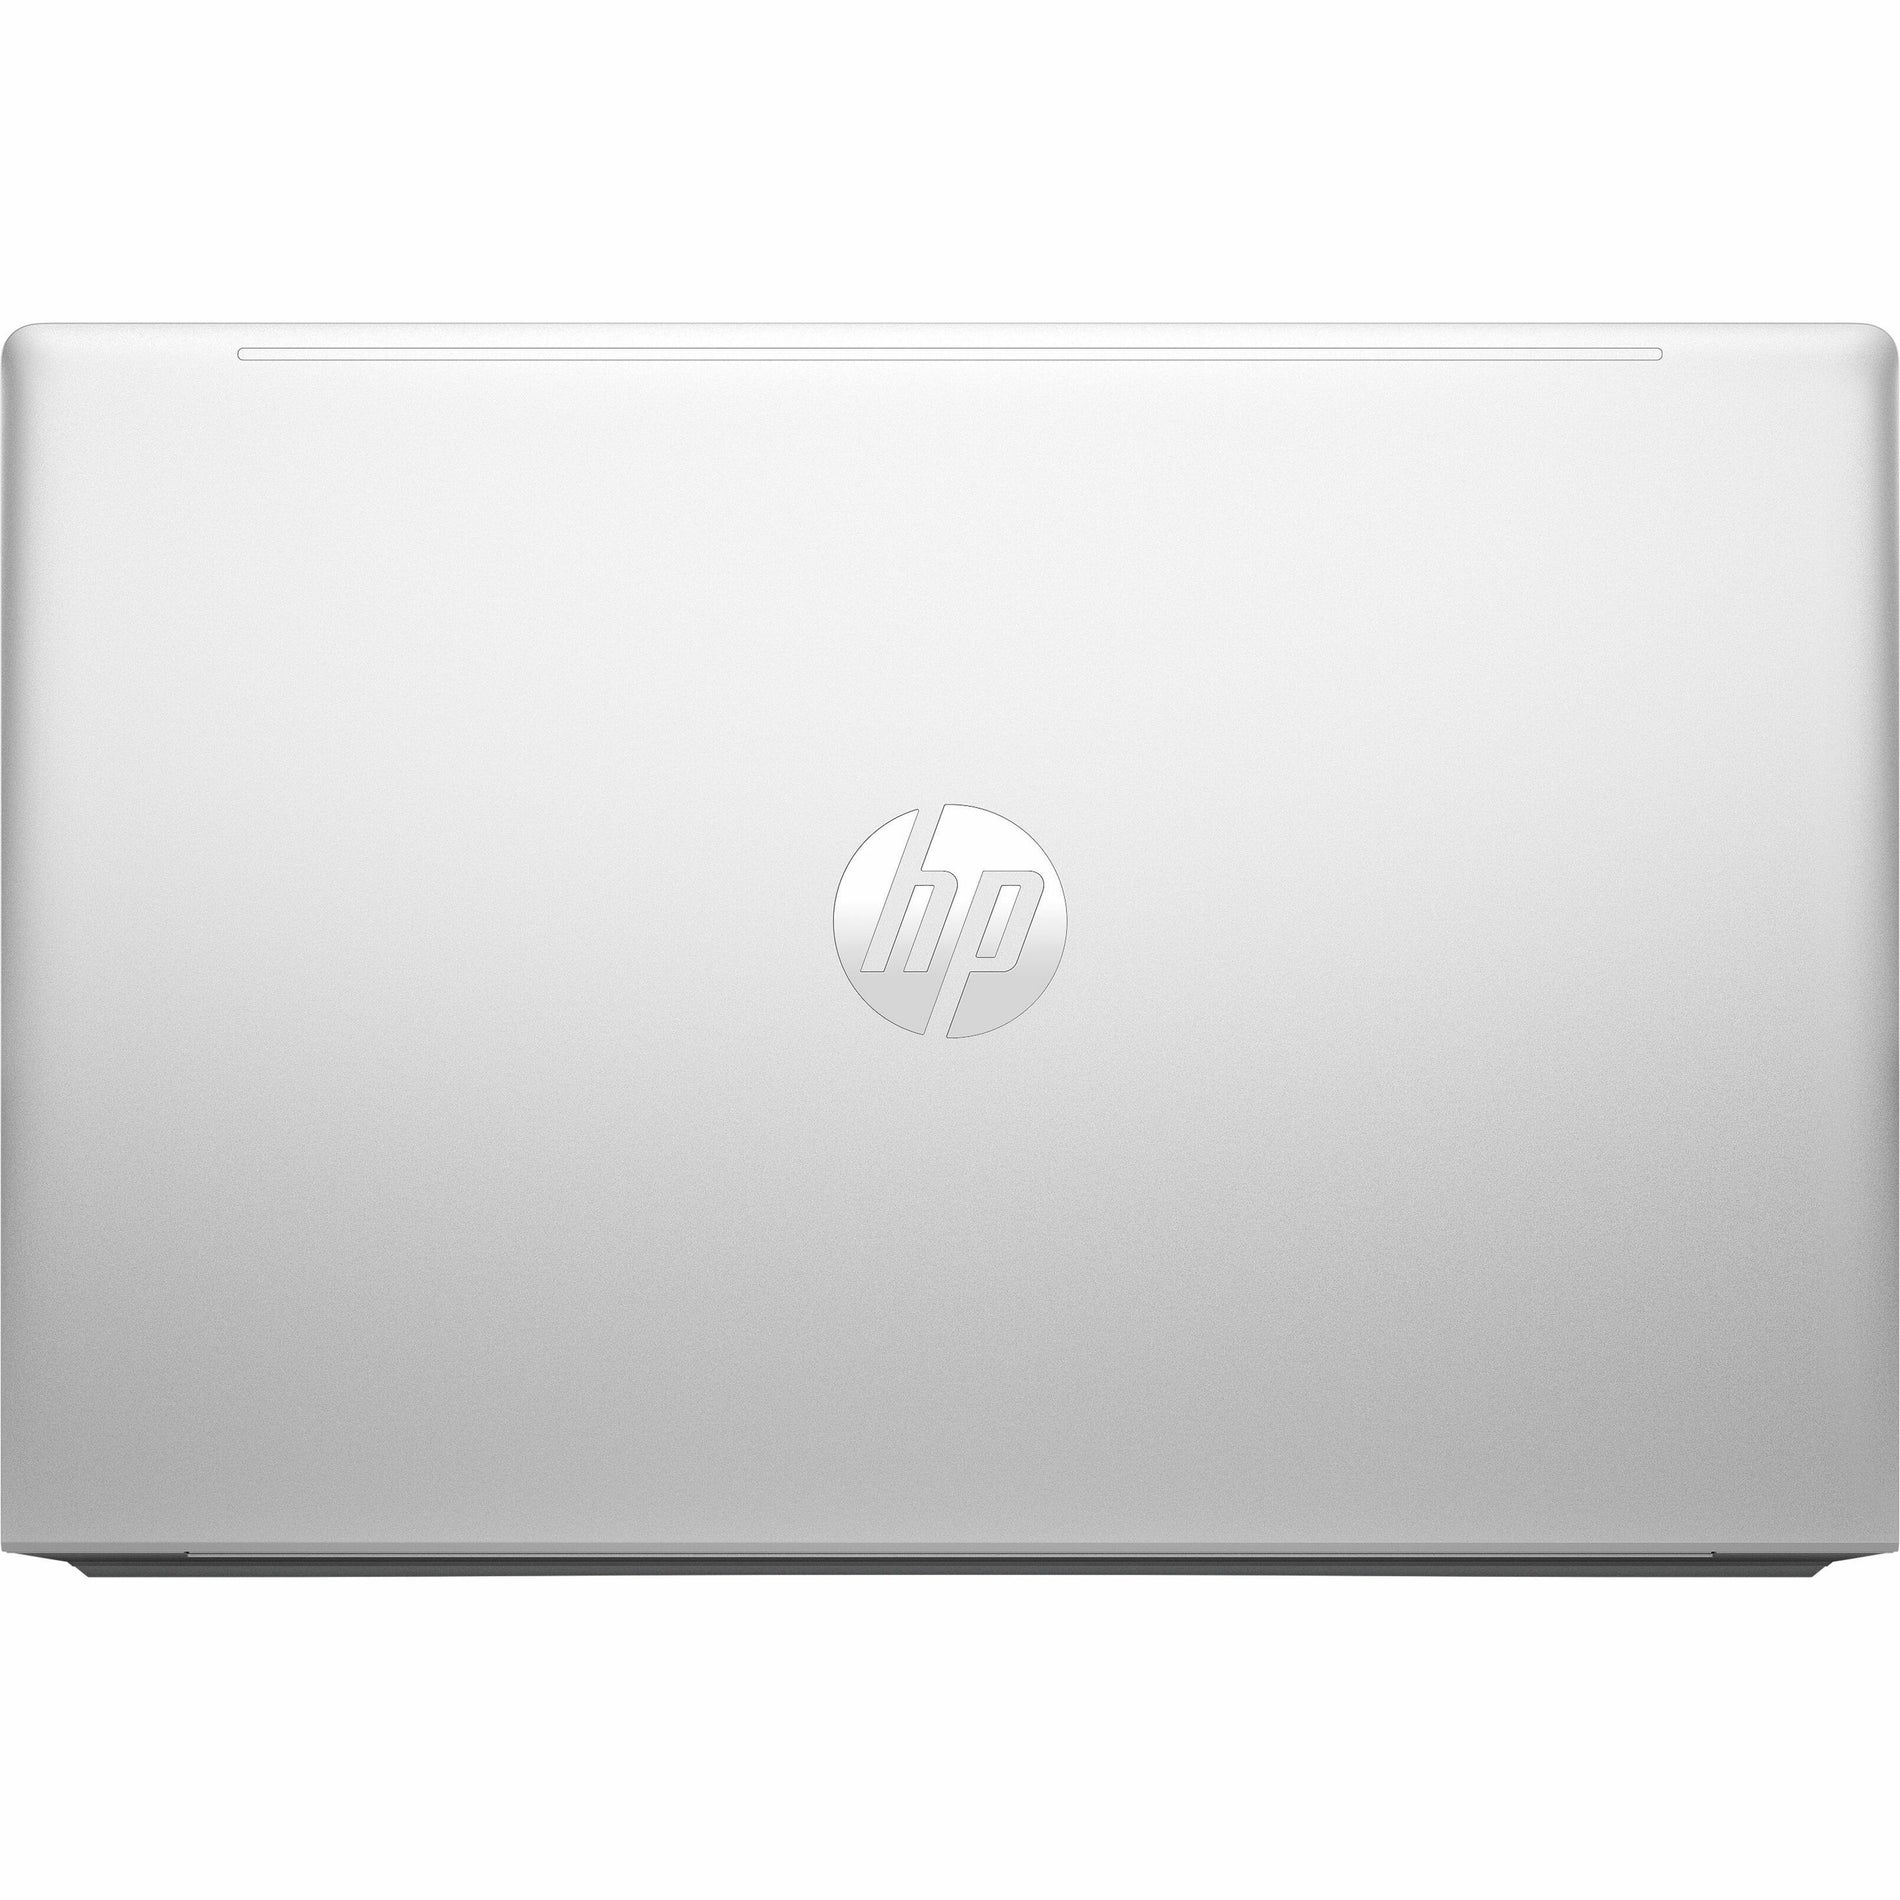 HP ProBook 450 15.6-inch G10 Notebook PC Wolf Pro Security Edition [Discontinued]